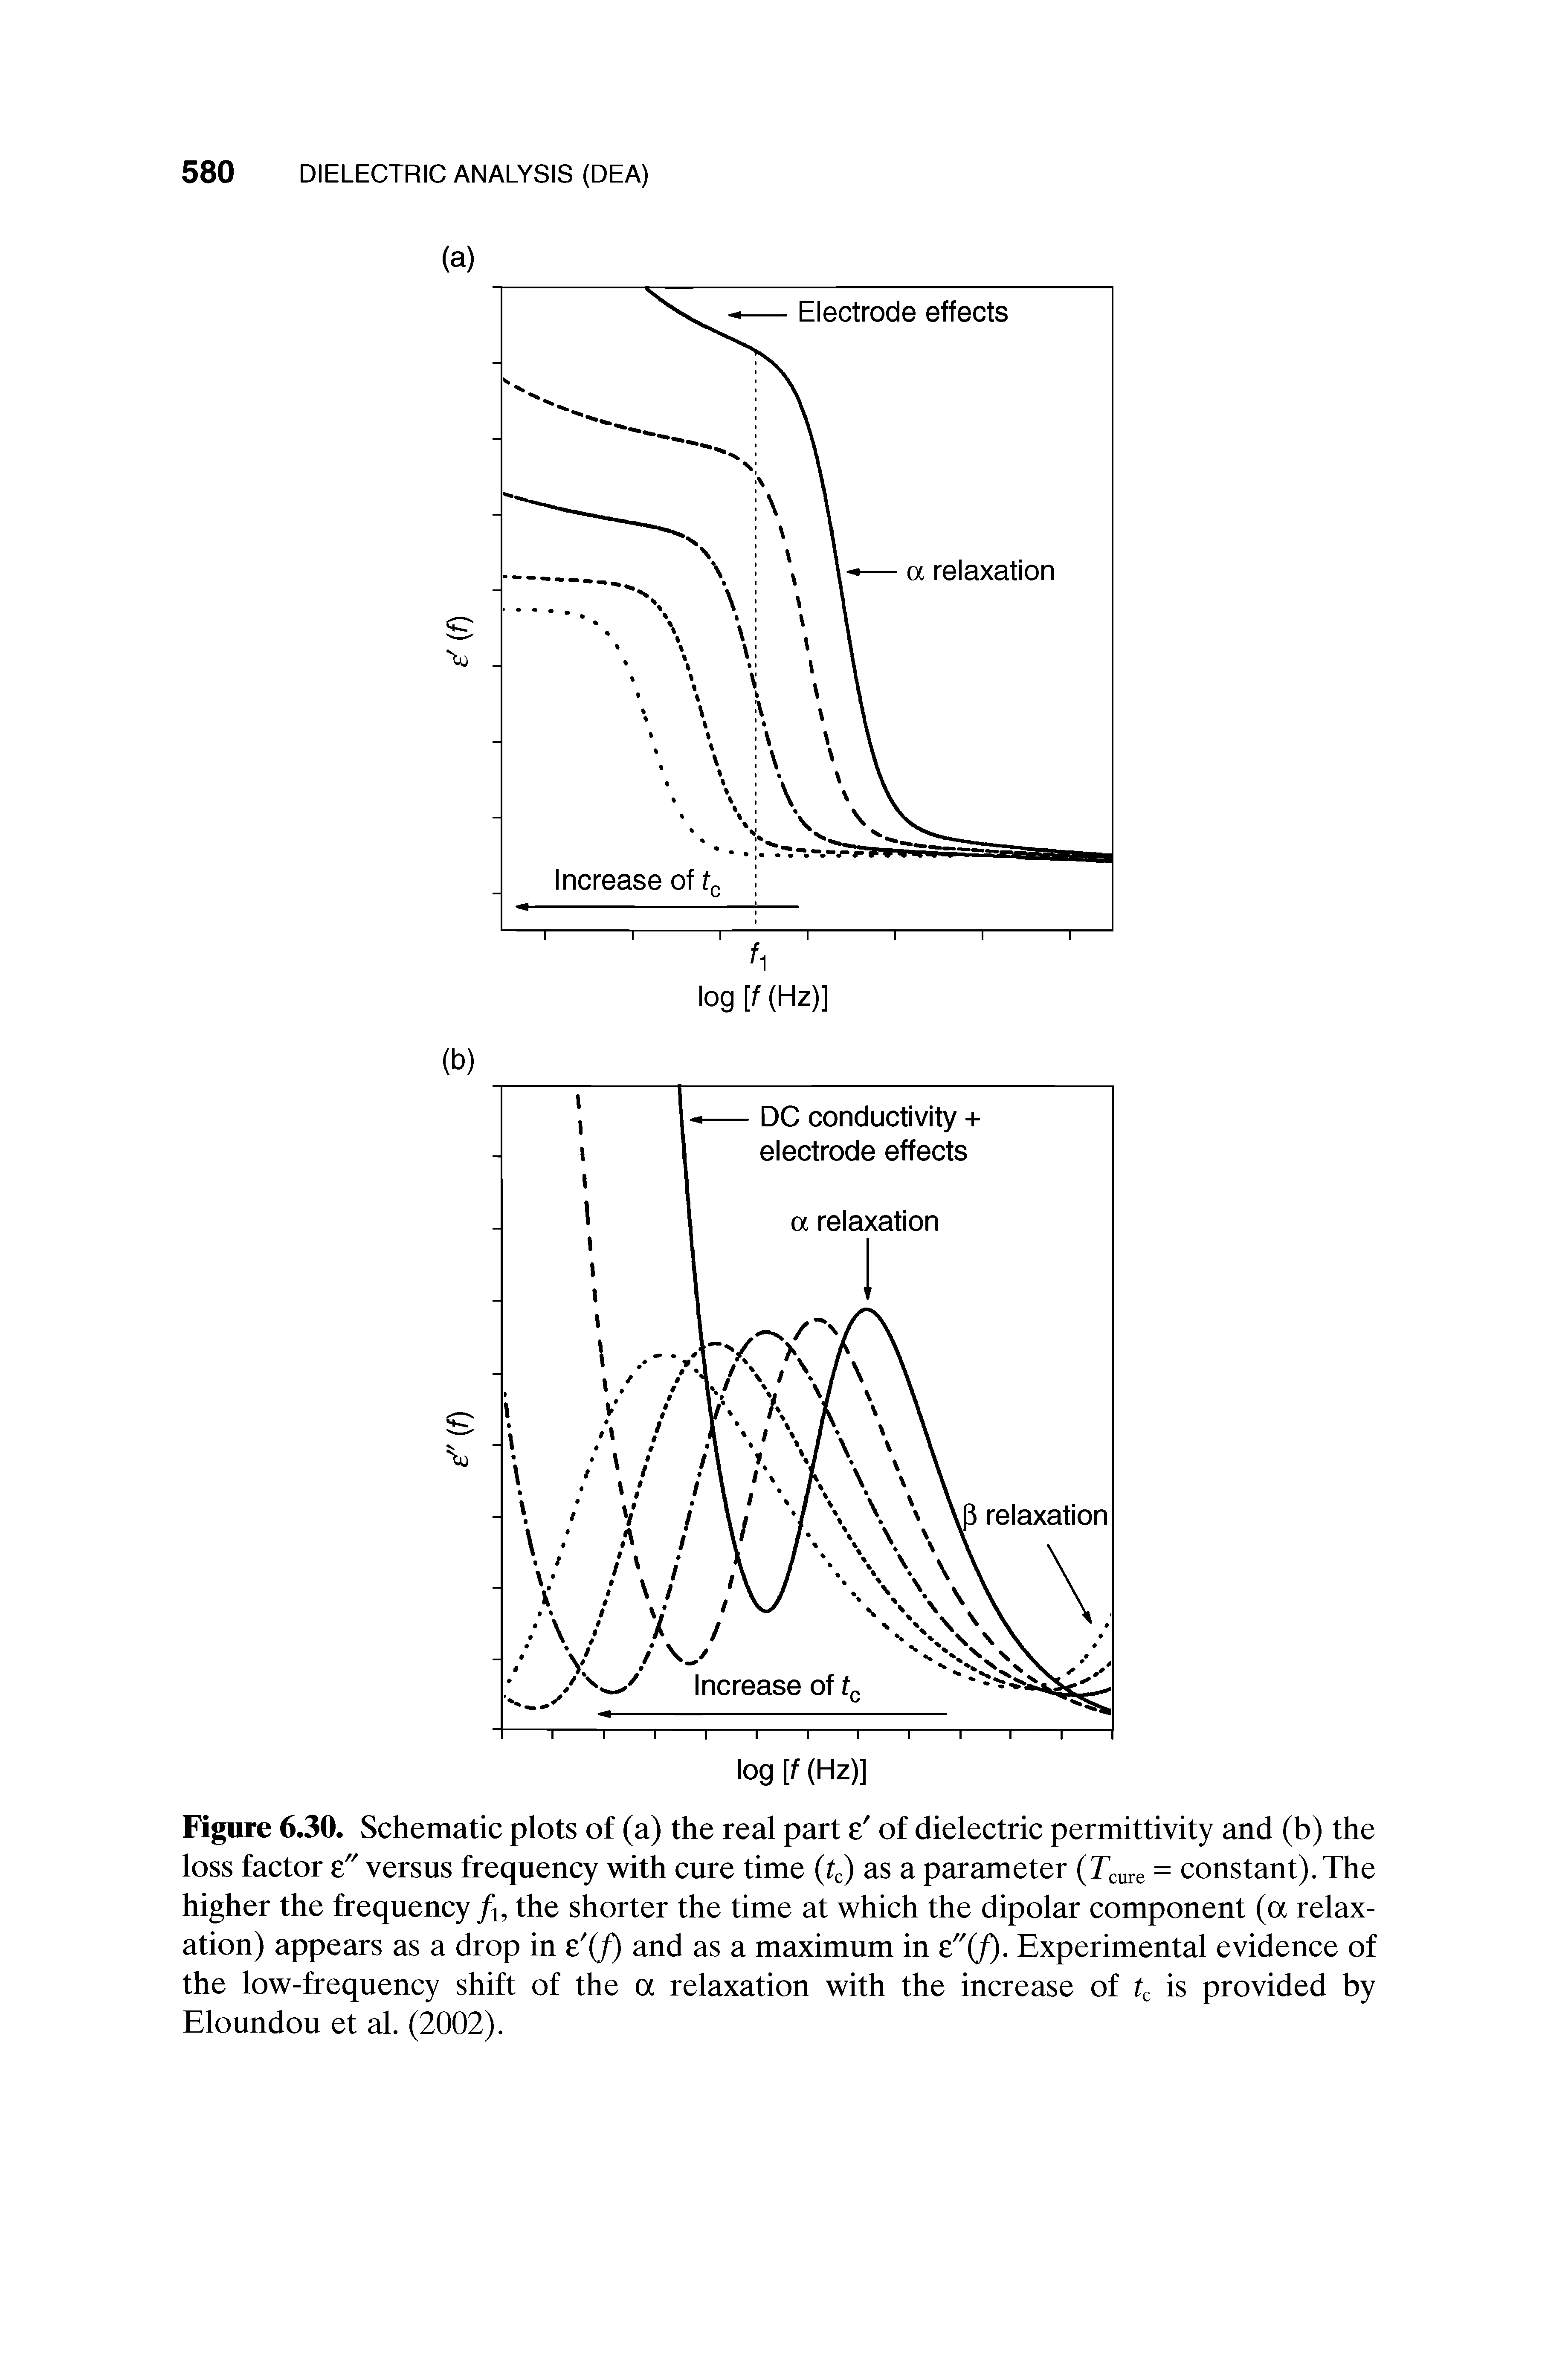 Figure 6.30. Schematic plots of (a) the real part e of dielectric permittivity and (b) the loss factor e" versus frequency with cure time (tc) as a parameter (Tcure = constant). The higher the frequency /i, the shorter the time at which the dipolar component (a relaxation) appears as a drop in e (f) and as a maximum in "(/). Experimental evidence of the low-frequency shift of the a relaxation with the increase of U is provided by Eloundou et al. (2002).